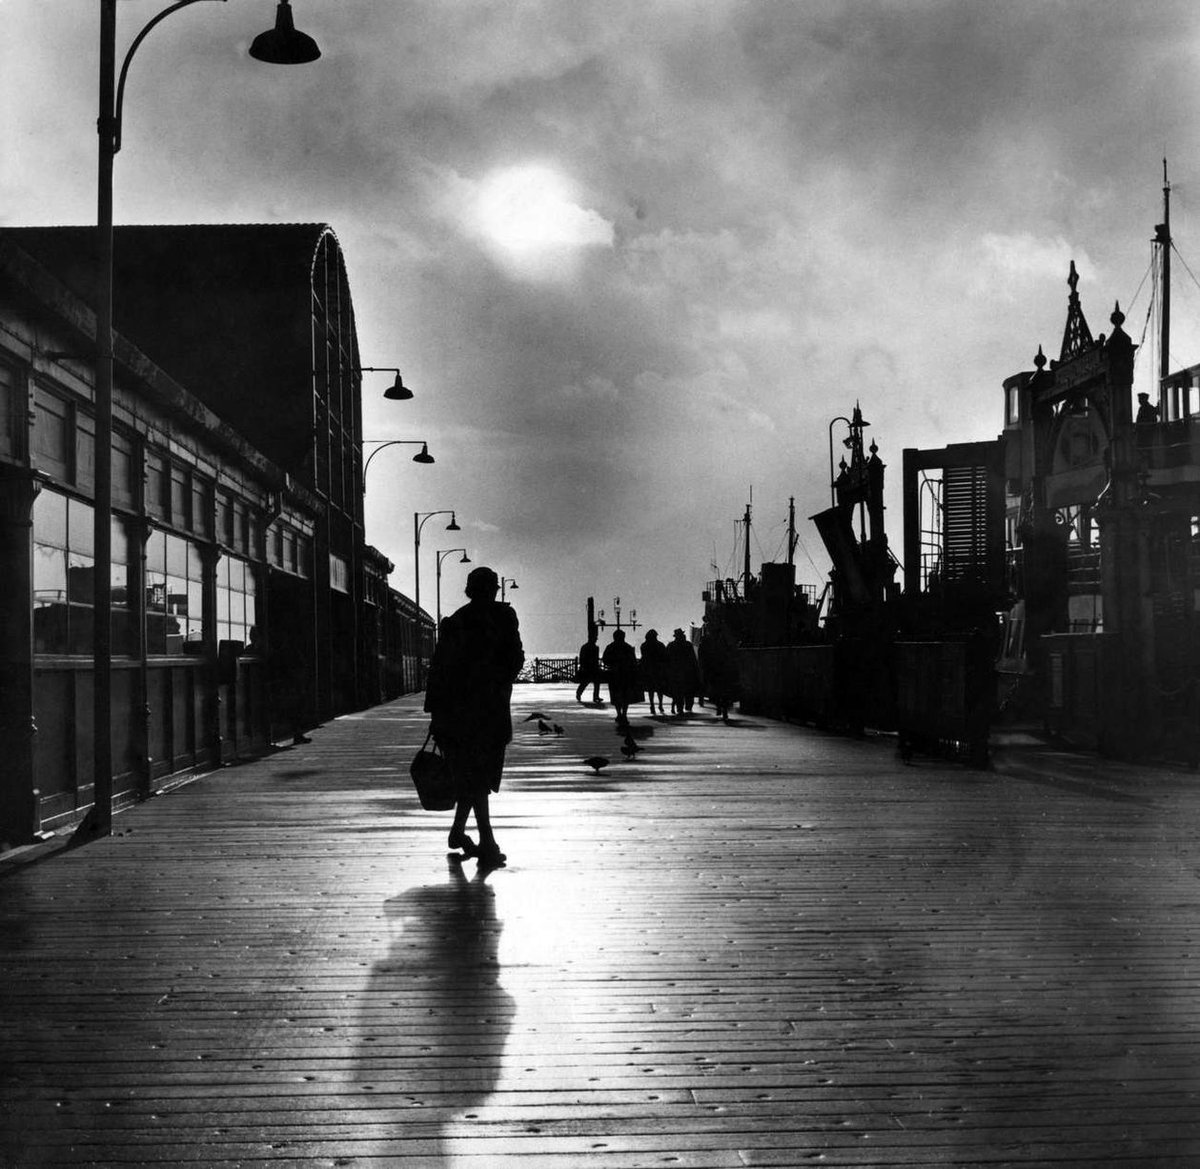 ✴📷Mirrorpix. Storm Clouds over Liverpool Landing Stage, Meyserside, 1950.
#blackandwhitephotography
#photography #monochrome
#streetphotography #Art
#vintagephotograph